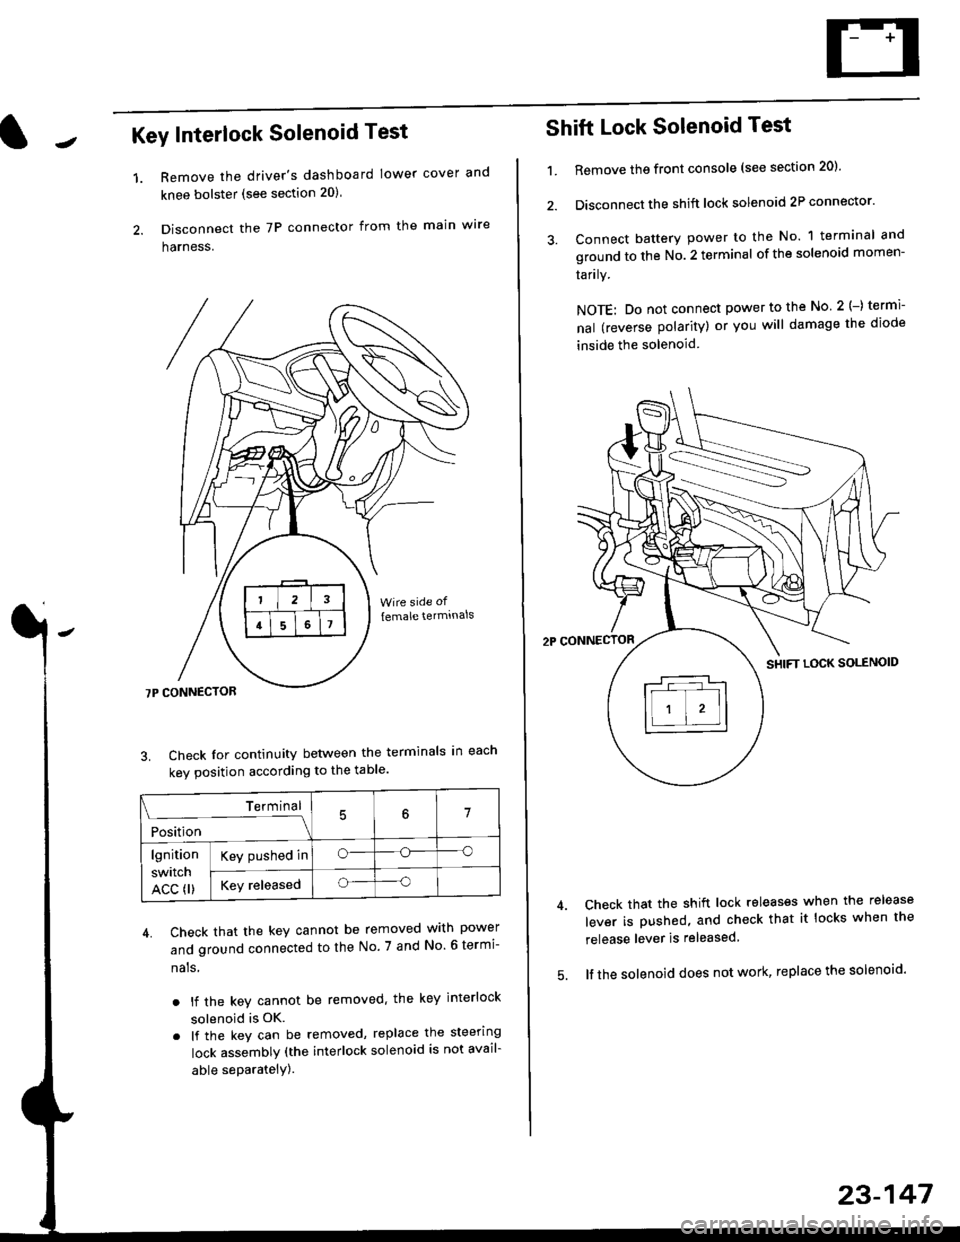 HONDA CIVIC 1999 6.G Workshop Manual Key Interlock Solenoid Test
Remove the drivers dashboard lower cover and
knee bolster (see section 20)
Disconnect the 7P connector from the main wre
harness.
3. Check Ior continuity between the term